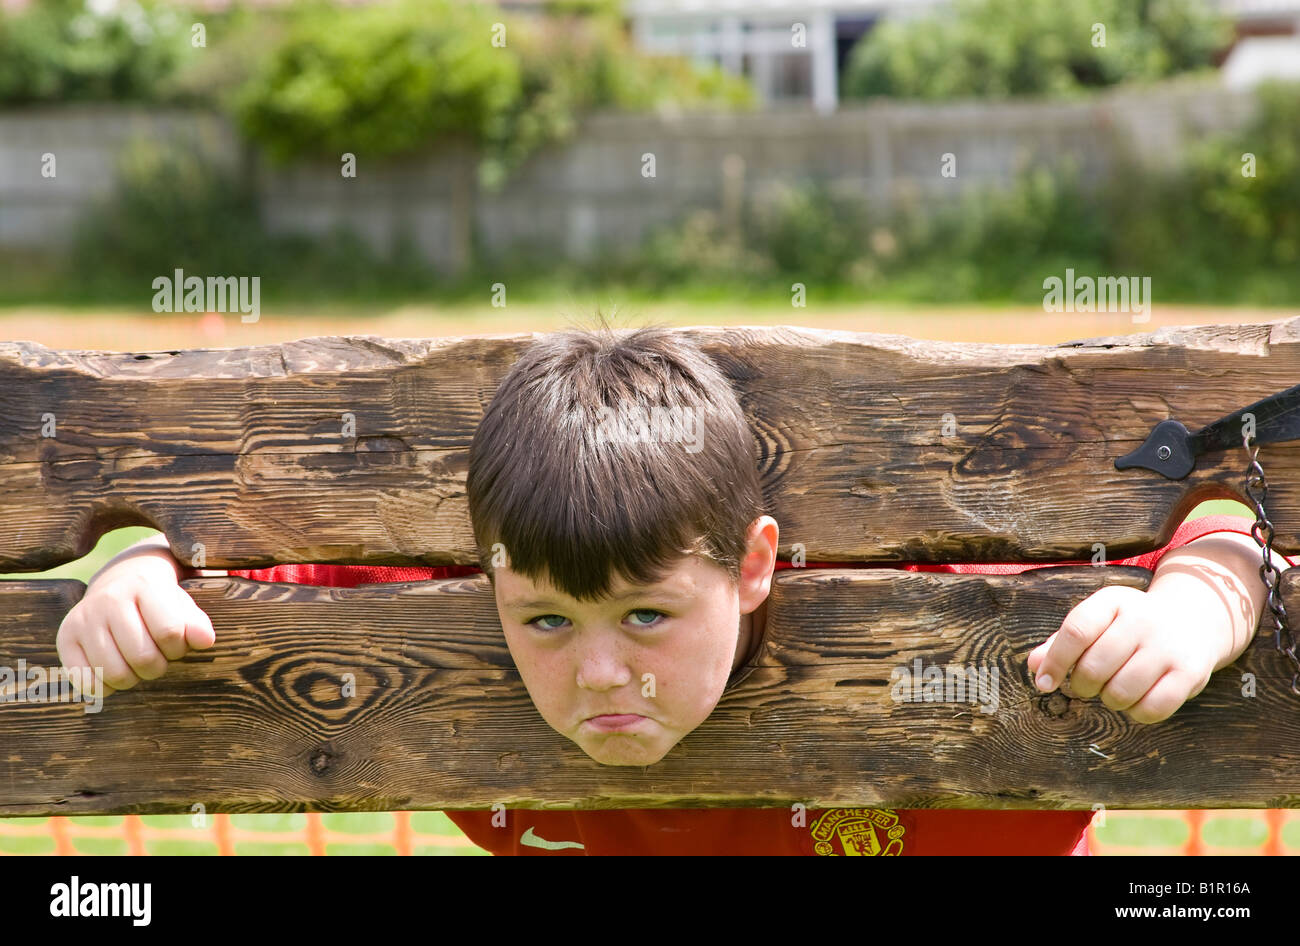 Young boy in wooden stocks. UK Stock Photo